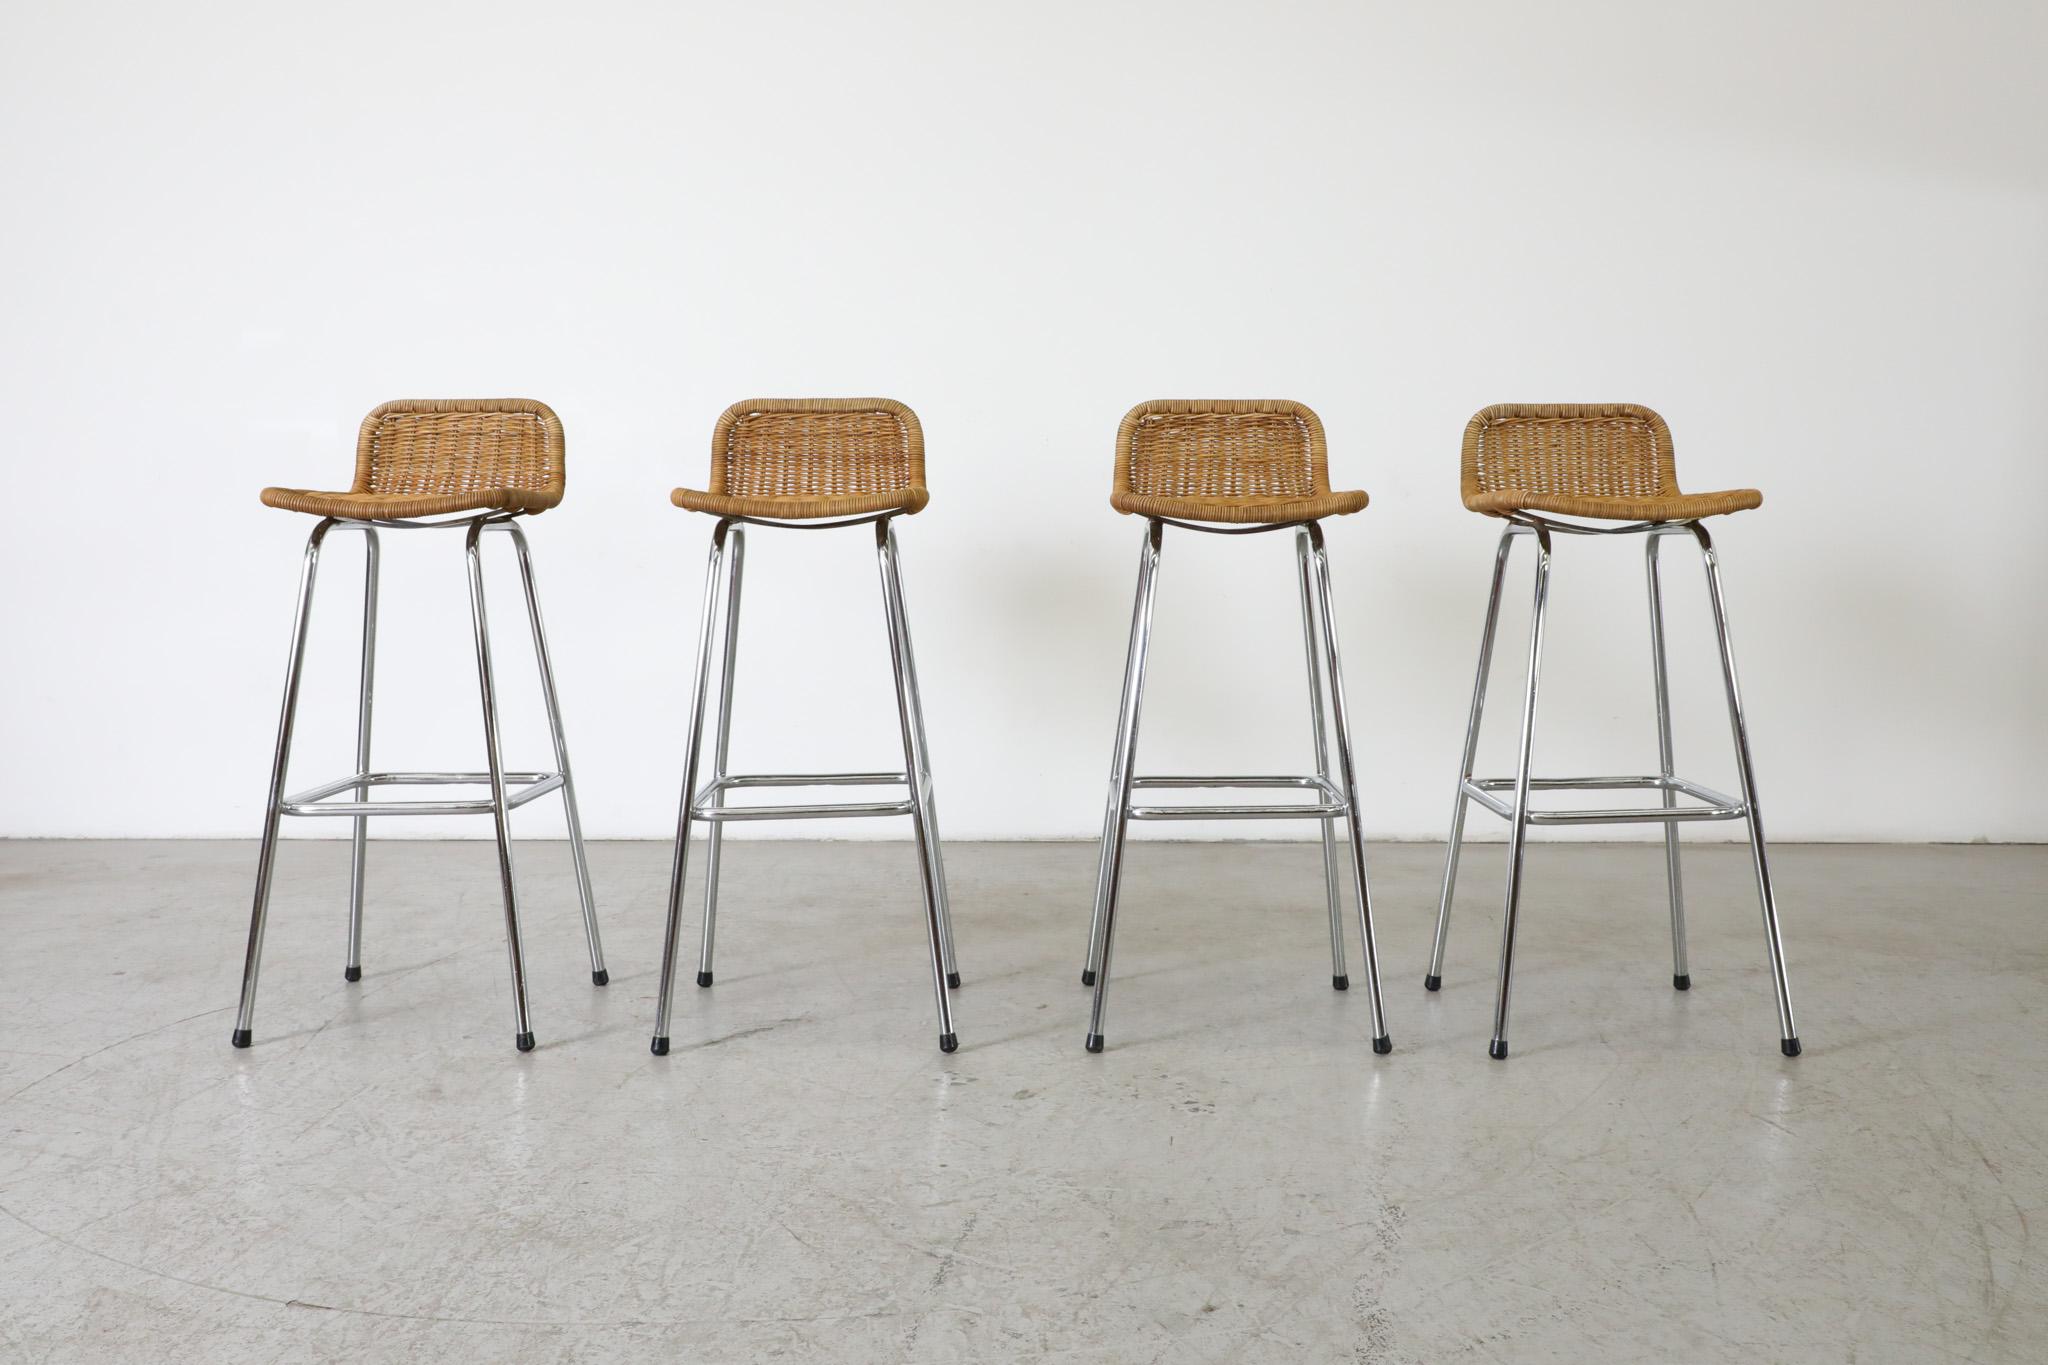 Set of 4 Charlotte Perriand style bar stools with low rounded rattan seat backs and chrome tubular frames. In original condition with visible wear consistent with their age and use. Wear and rattan color varies from stool to stool. Seat heights